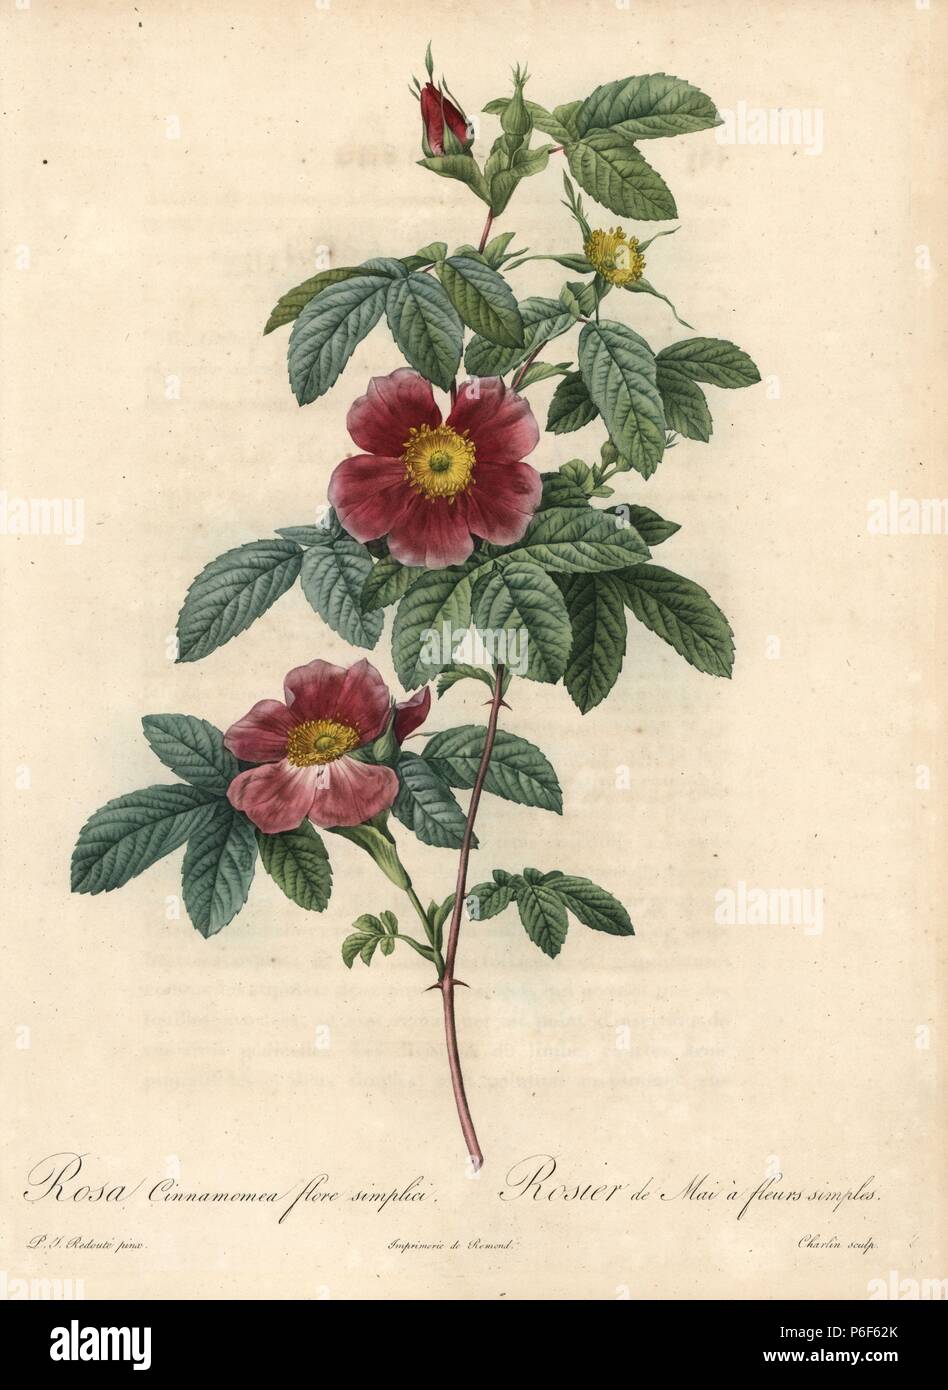 Single May rose, Rosa majalis (Rosa cinnamomea flore simplici). Handcoloured stipple copperplate engraving by Charlin after an illustration by Pierre-Joseph Redoute from "Les Roses," Firmin Didot, Paris, 1817. Stock Photo